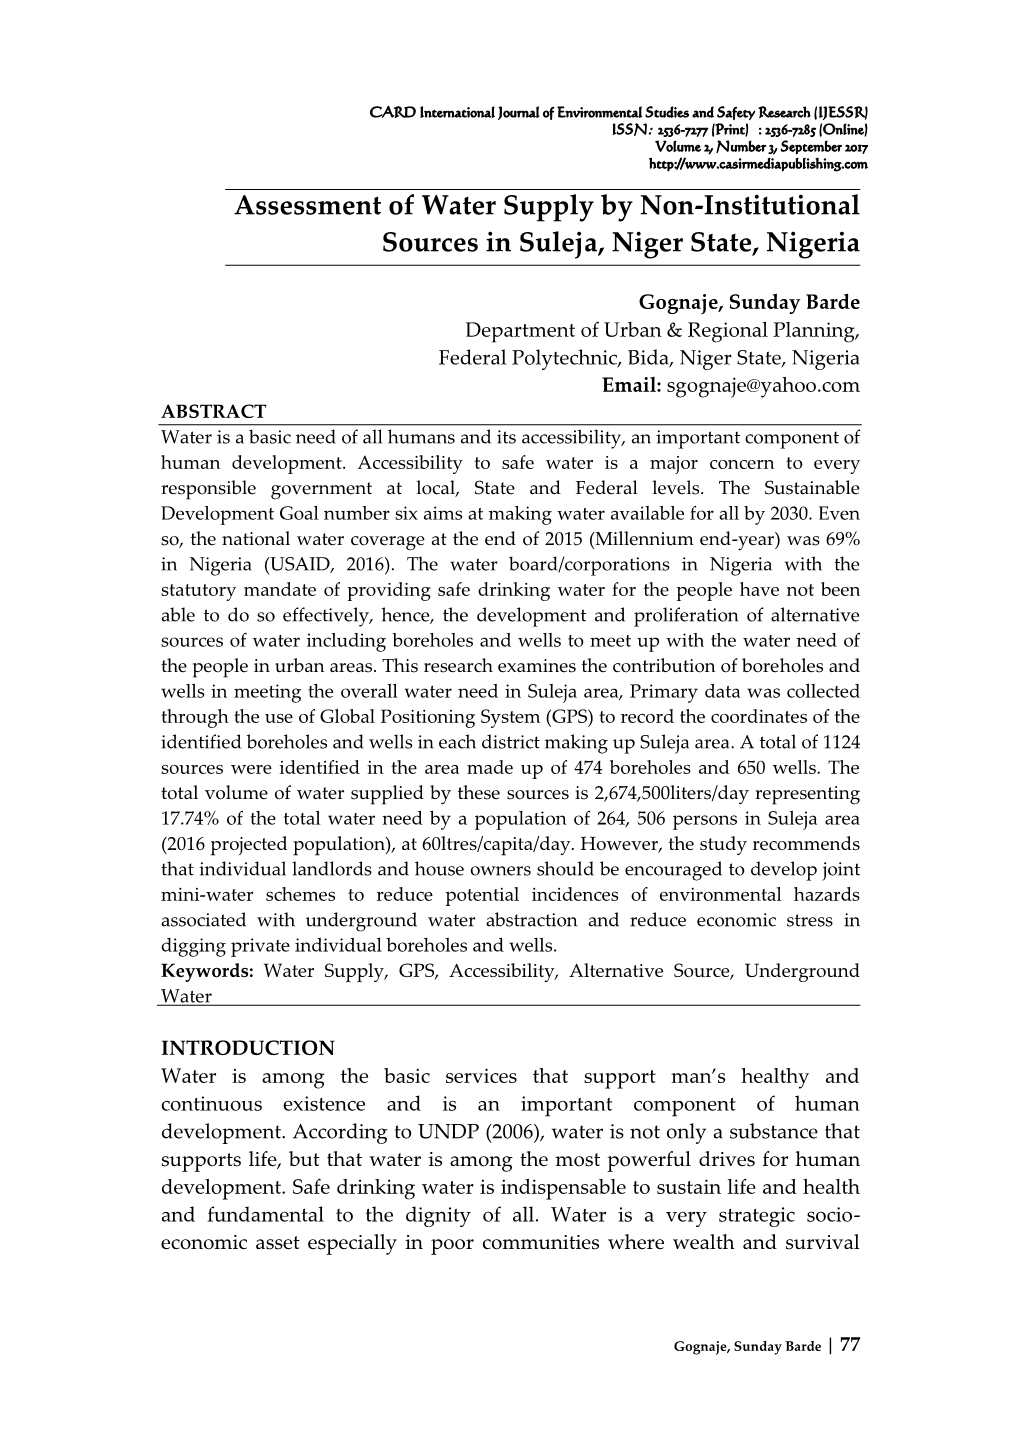 Assessment of Water Supply by Non-Institutional Sources in Suleja, Niger State, Nigeria